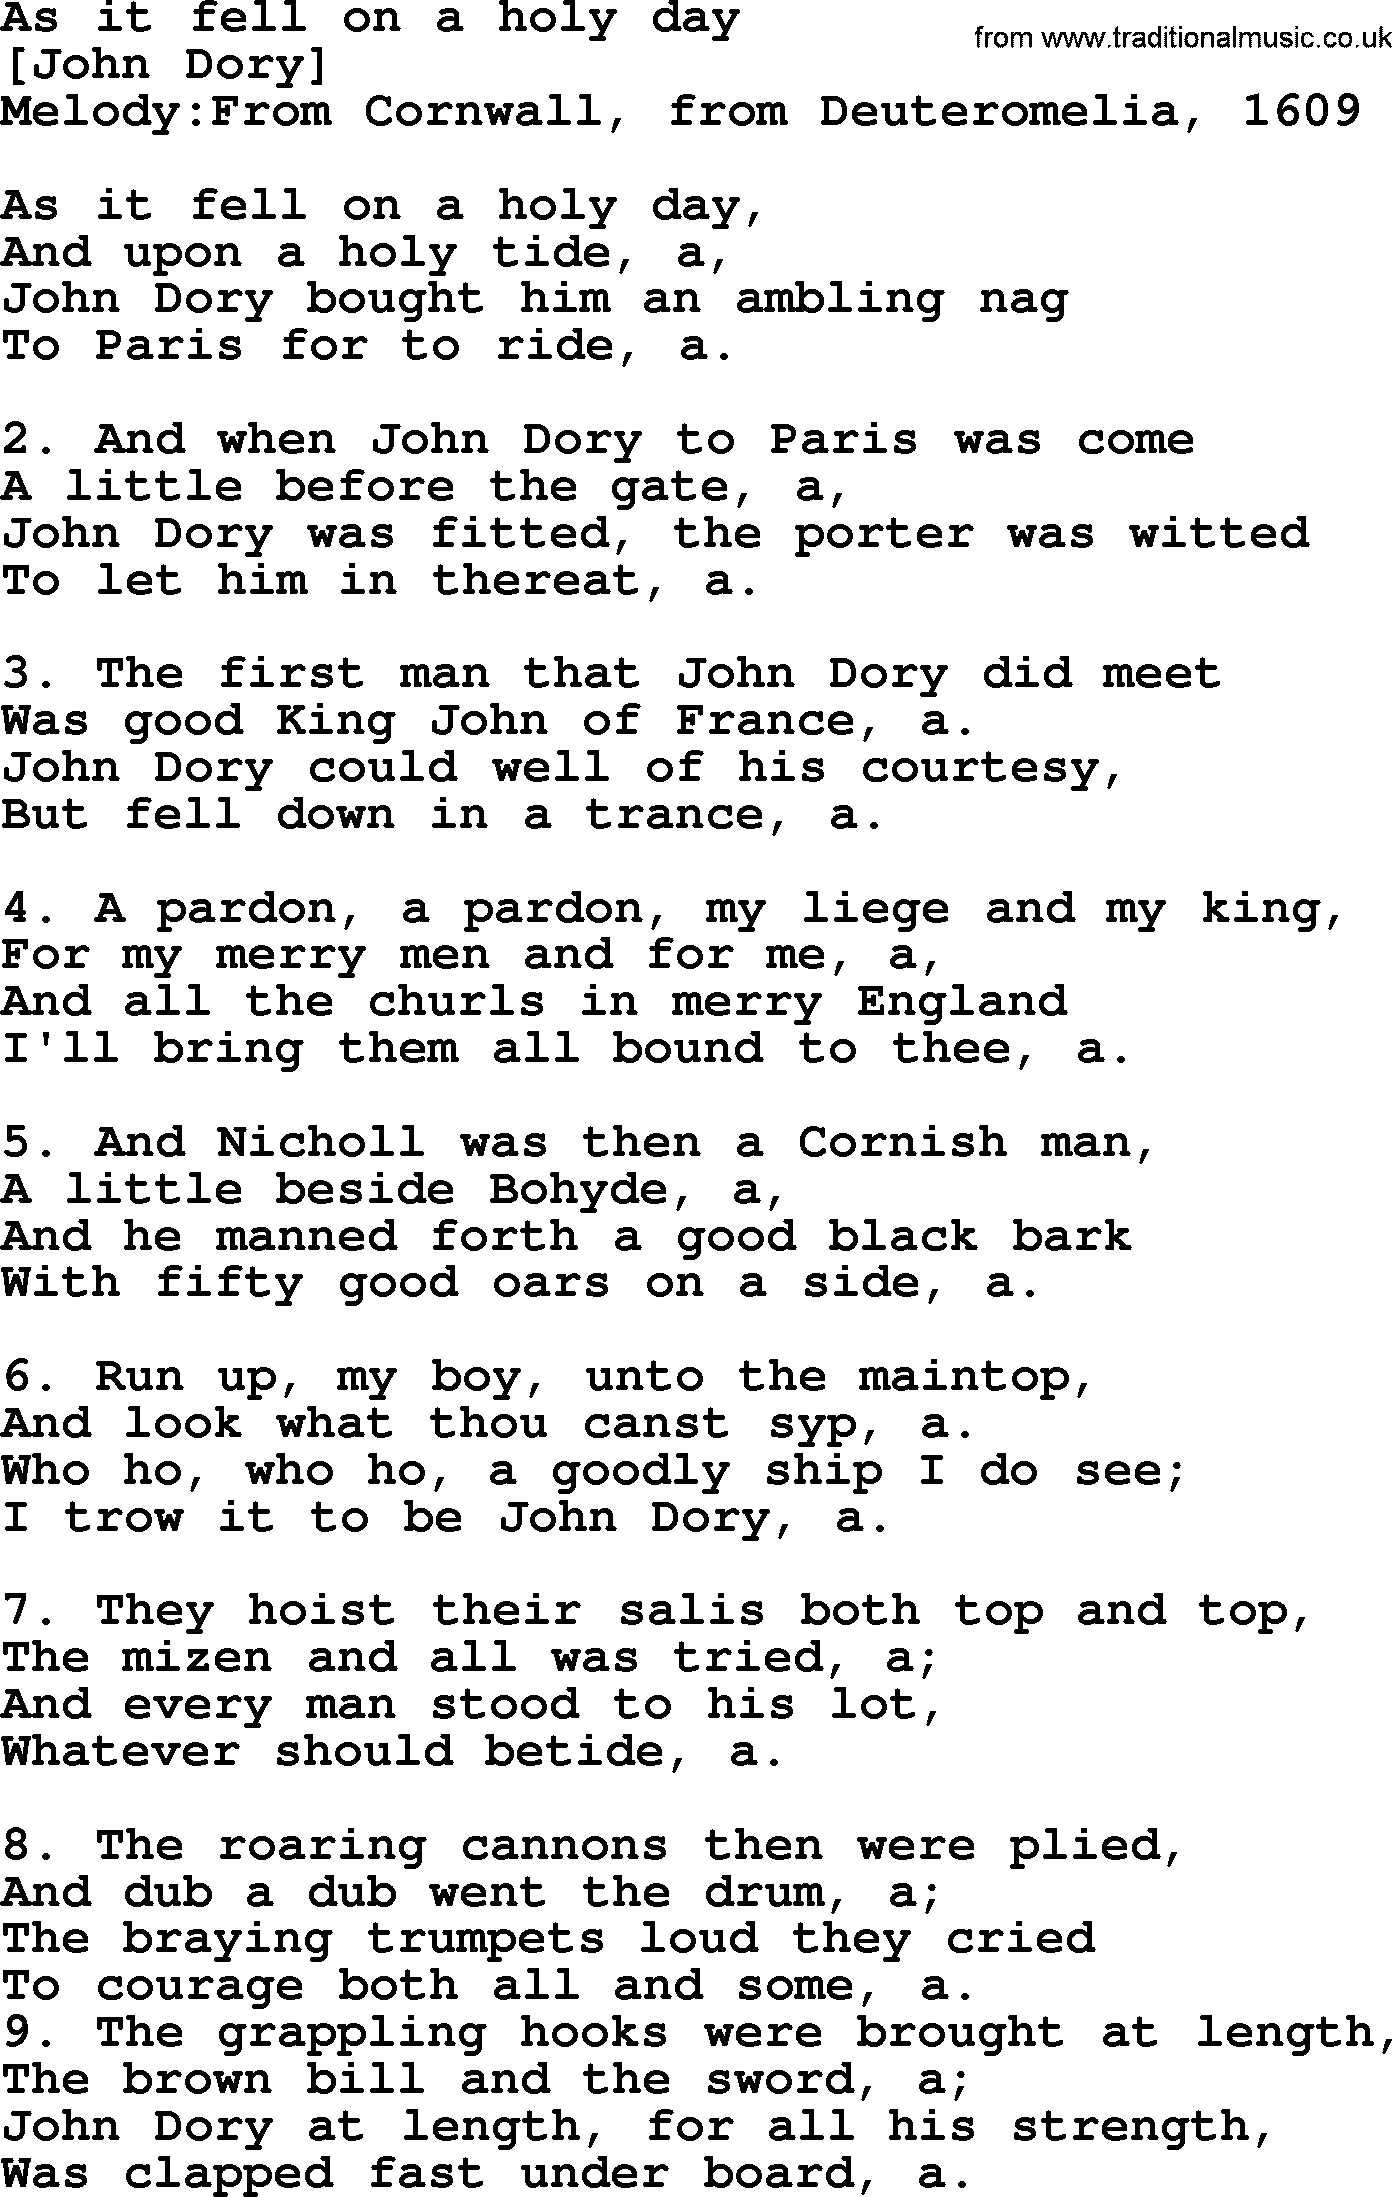 Old English Song: As It Fell On A Holy Day lyrics